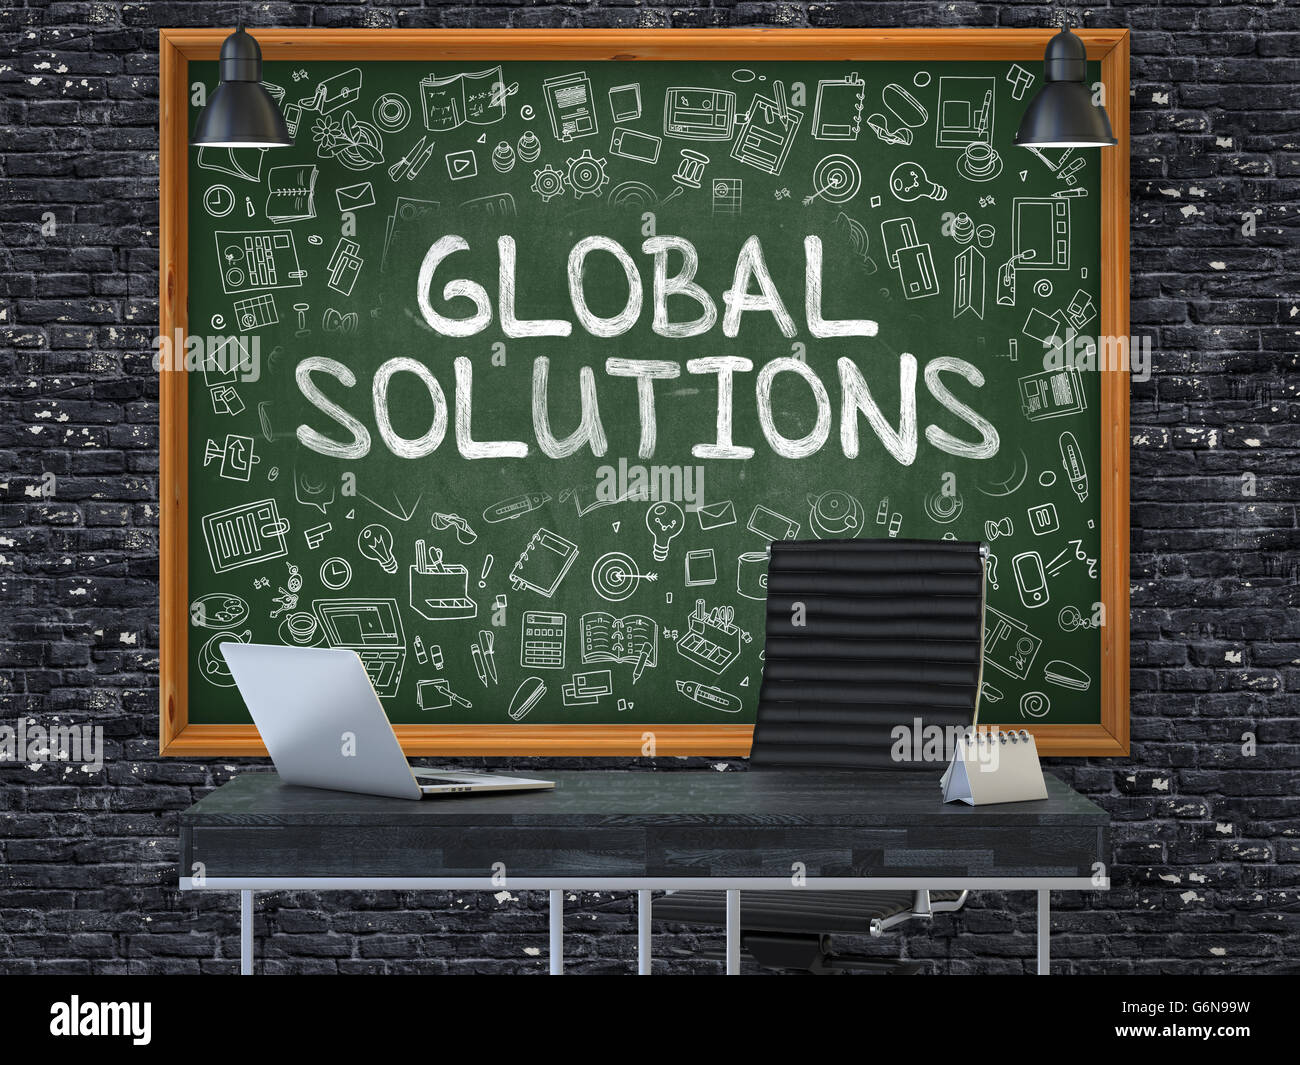 Global Solutions on Chalkboard with Doodle Icons. Stock Photo